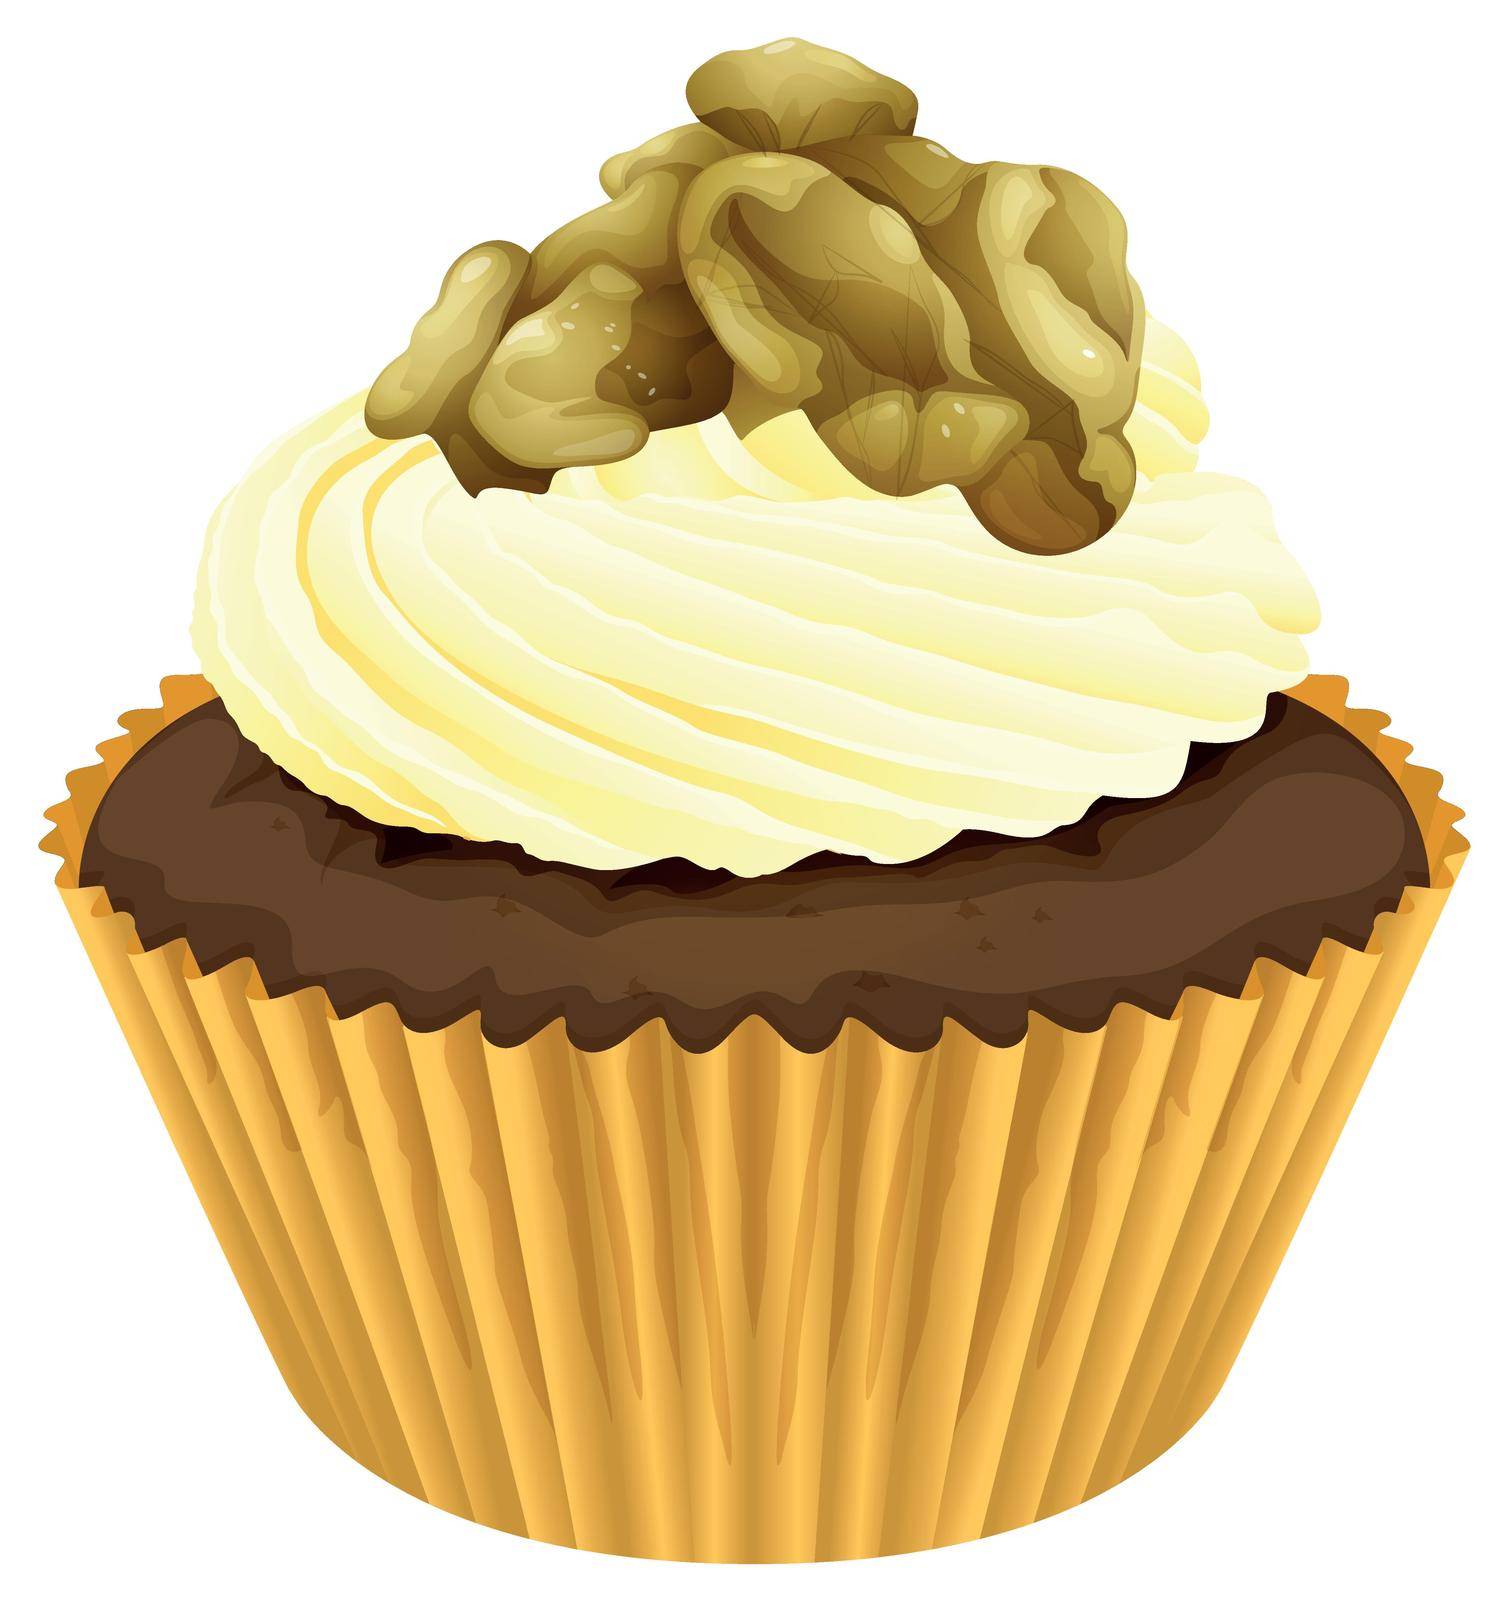 Illustration of an isolated cupcake